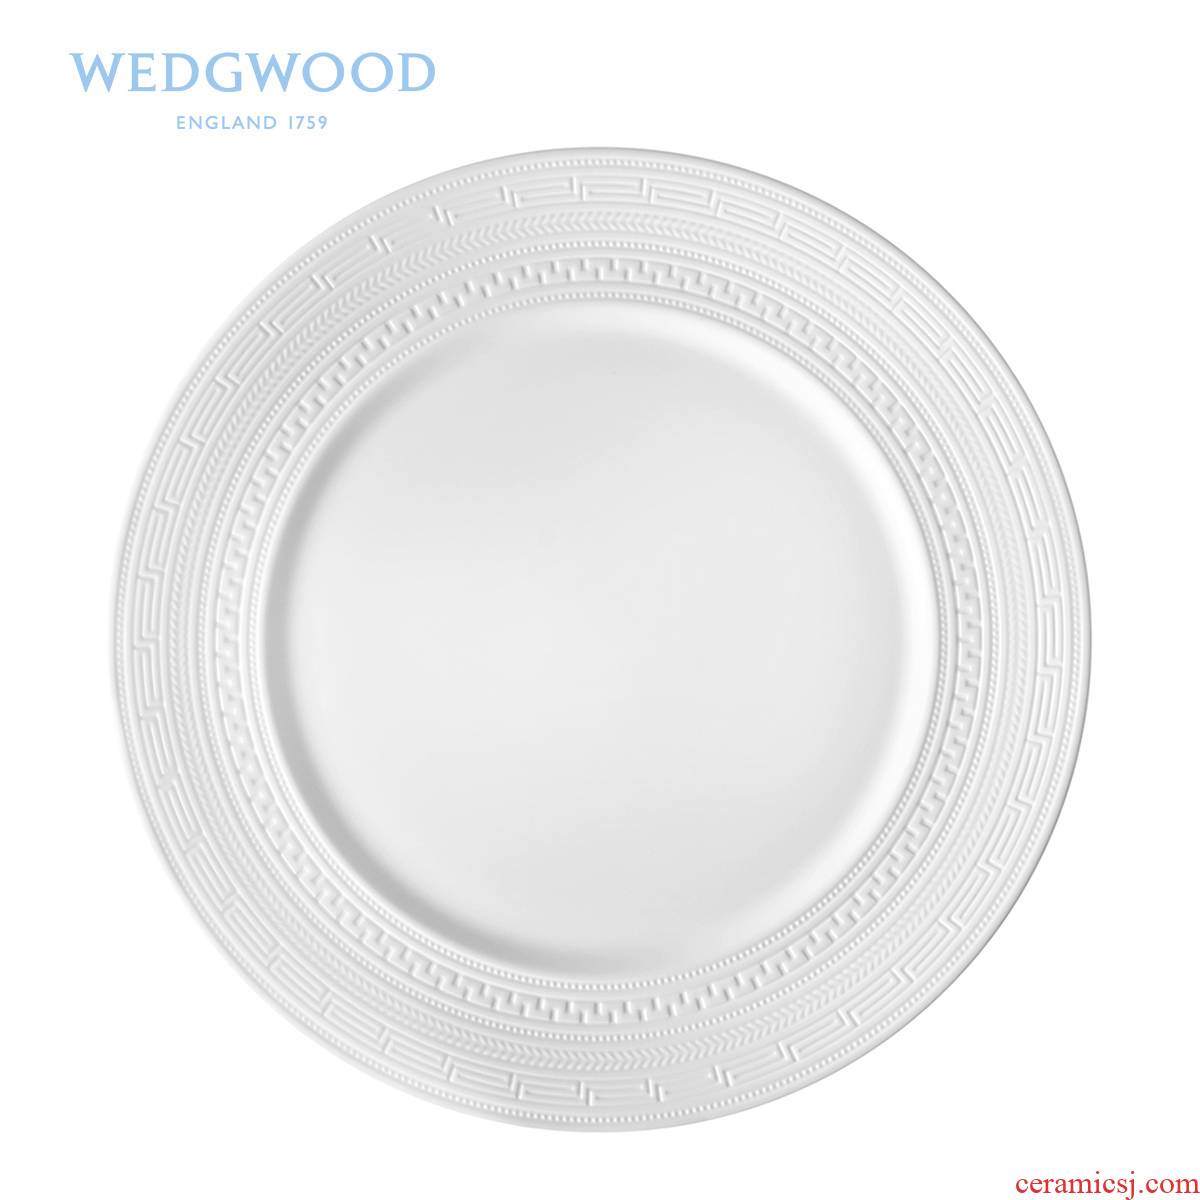 British Wedgwood waterford Wedgwood Intaglio anaglyph banquet dinner lining plate of 30 cm ipads porcelain plates